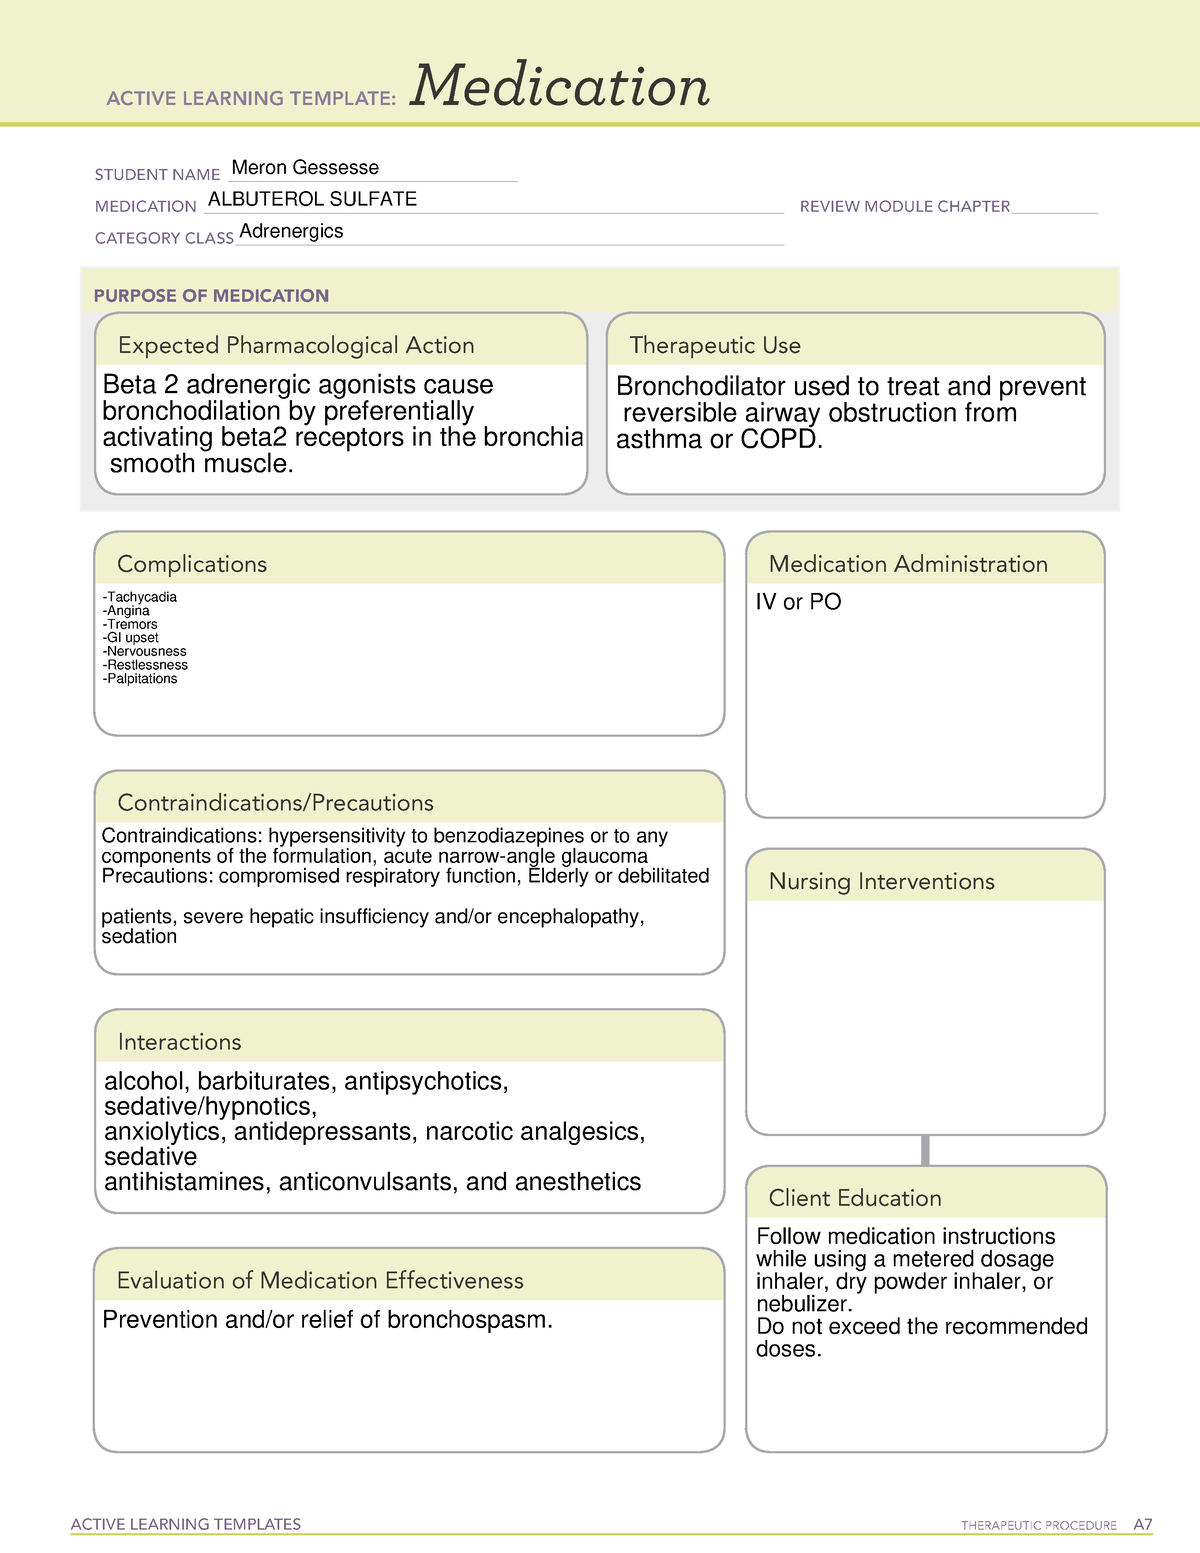 active-learning-template-medication-albuterol-sulfate-active-learning-templates-therapeutic